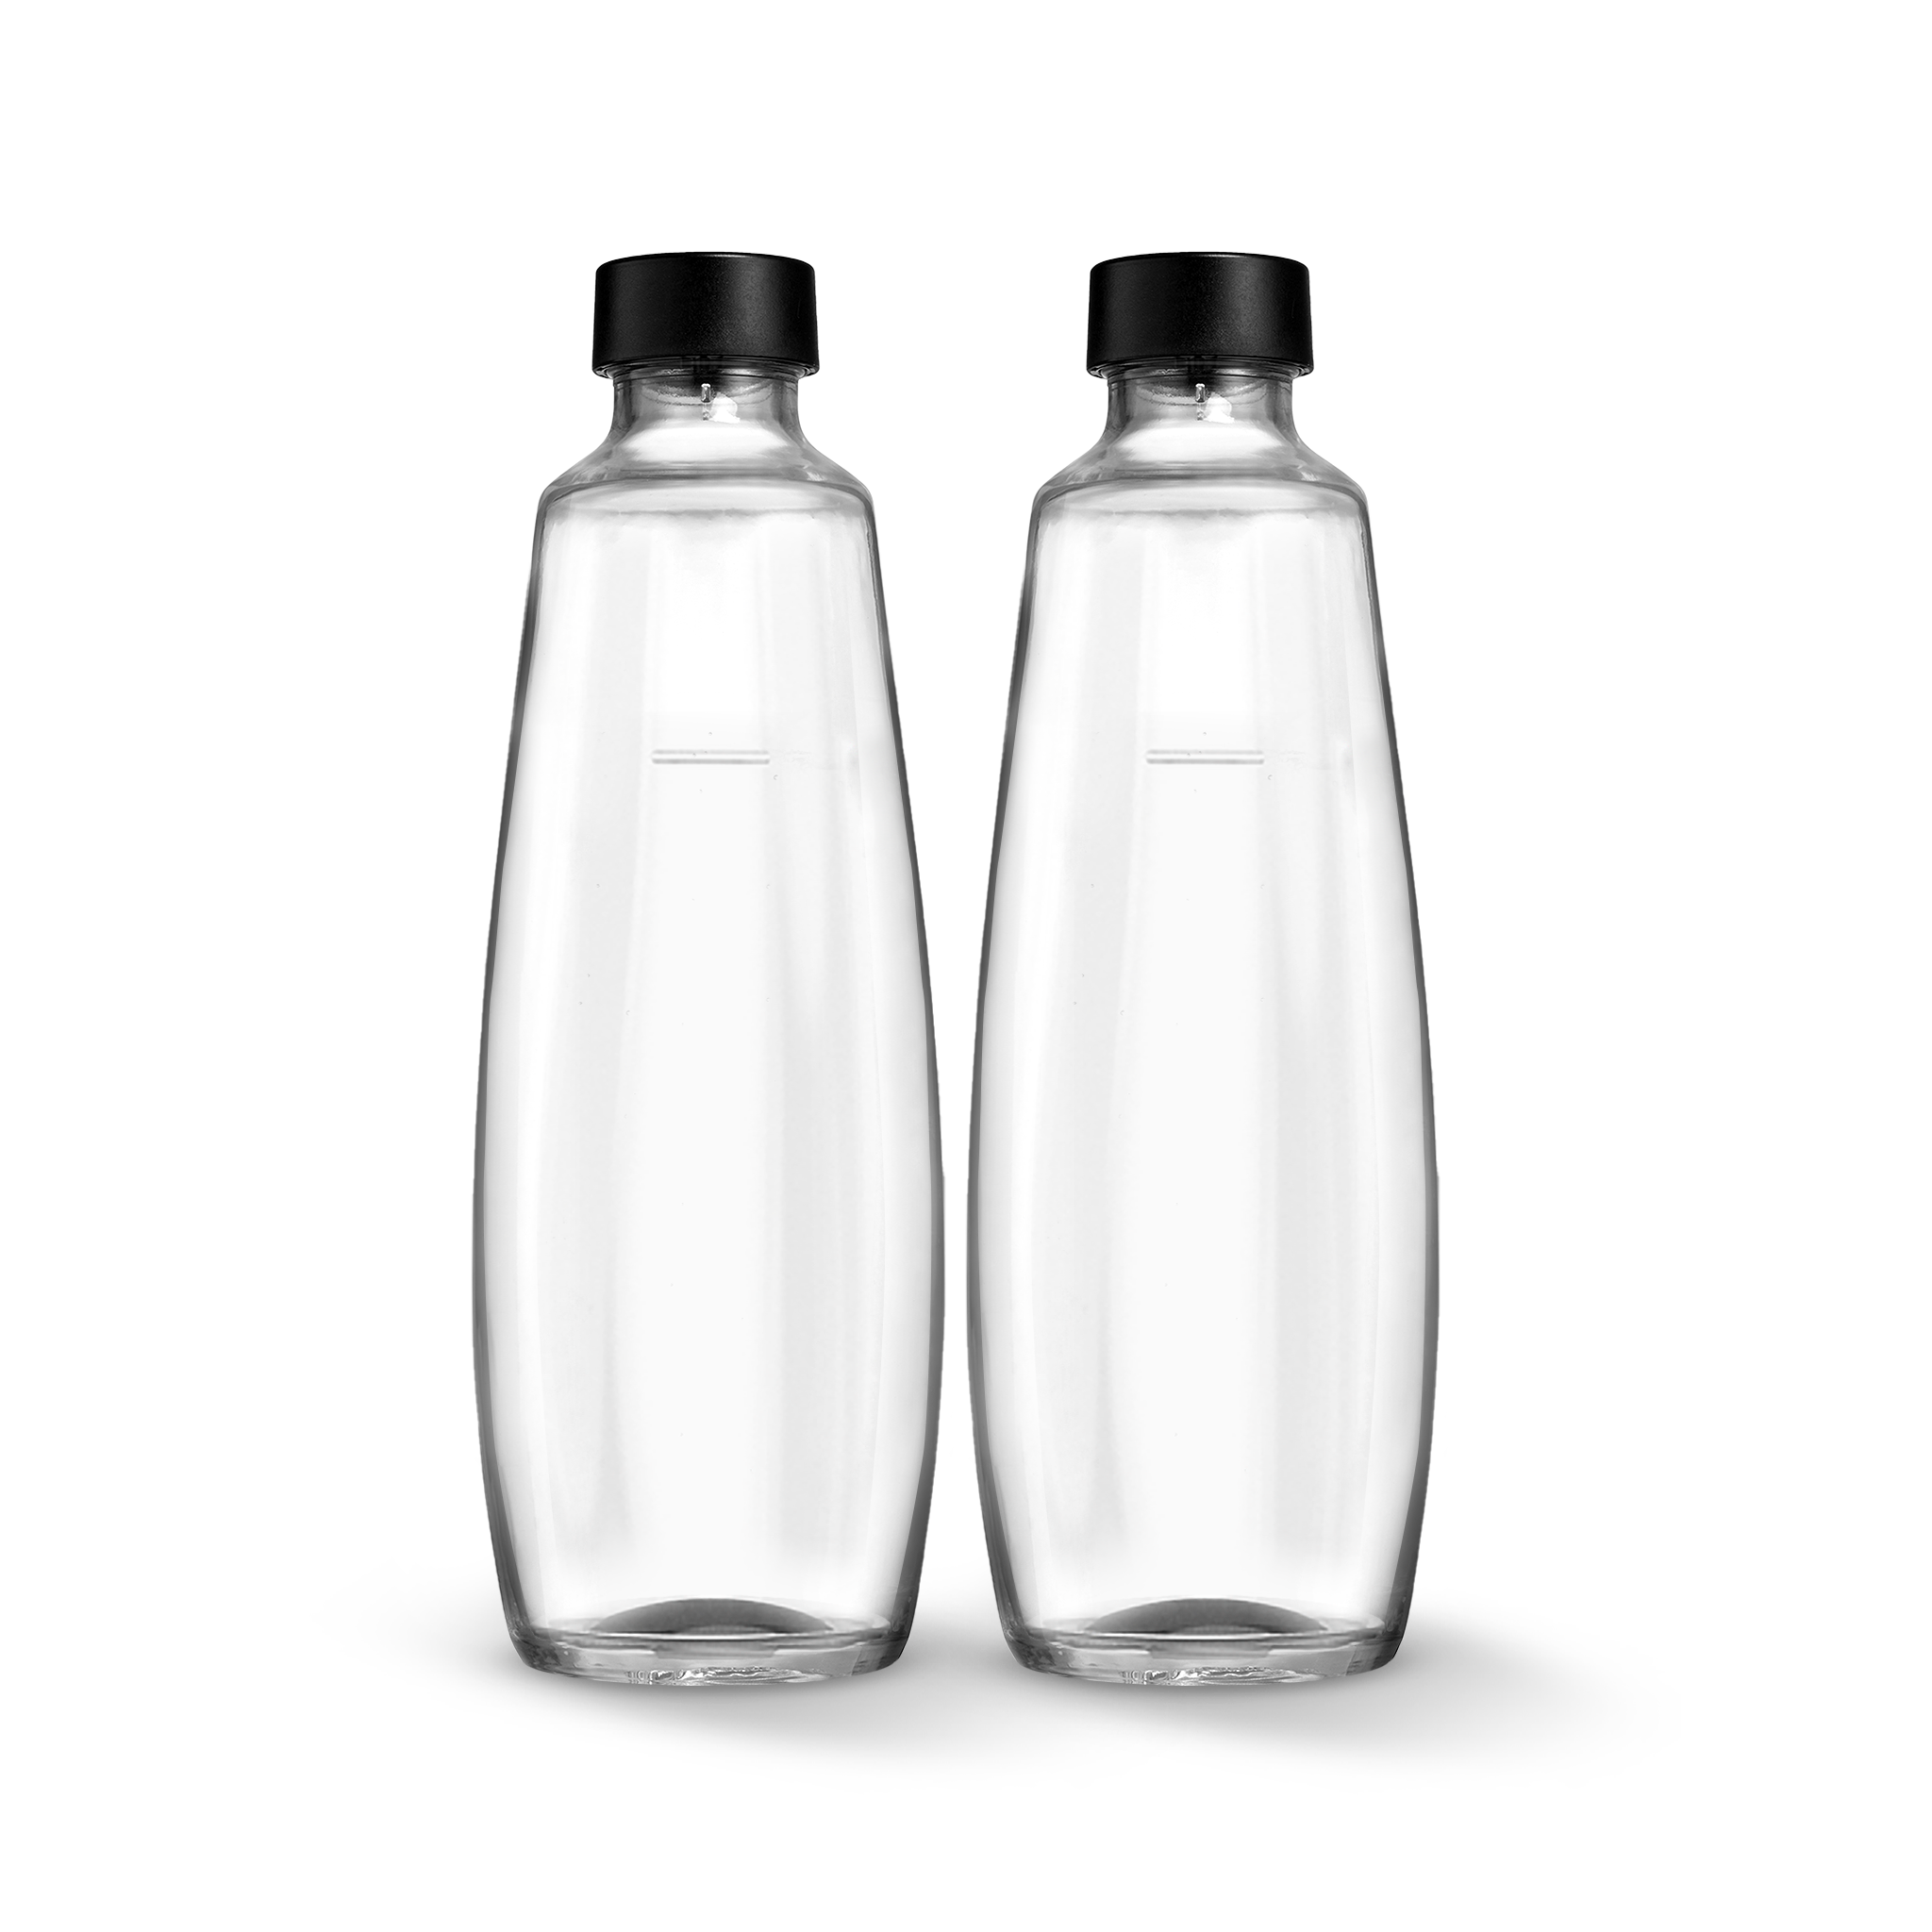 Sommerpromotion- DUO Glasflasche, 1 L*,  2er-Pack sodastream